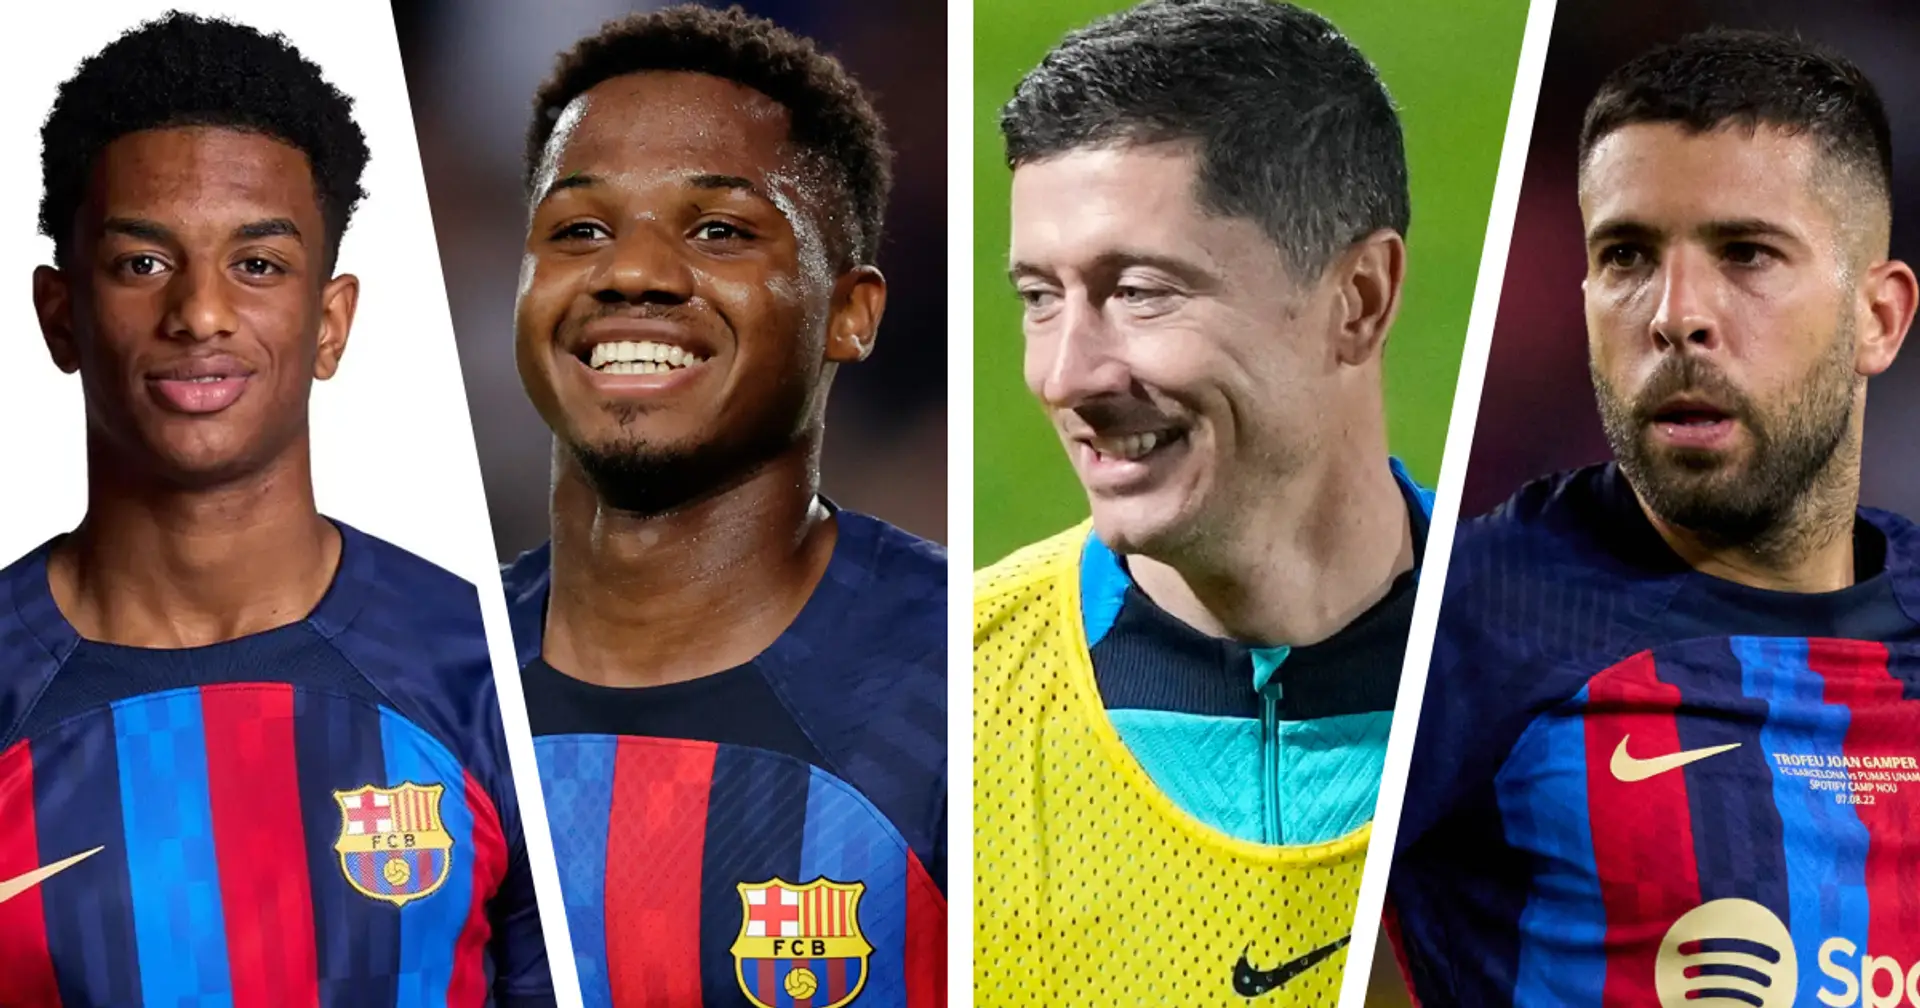 Barca's full 22-man squad after January transfer window